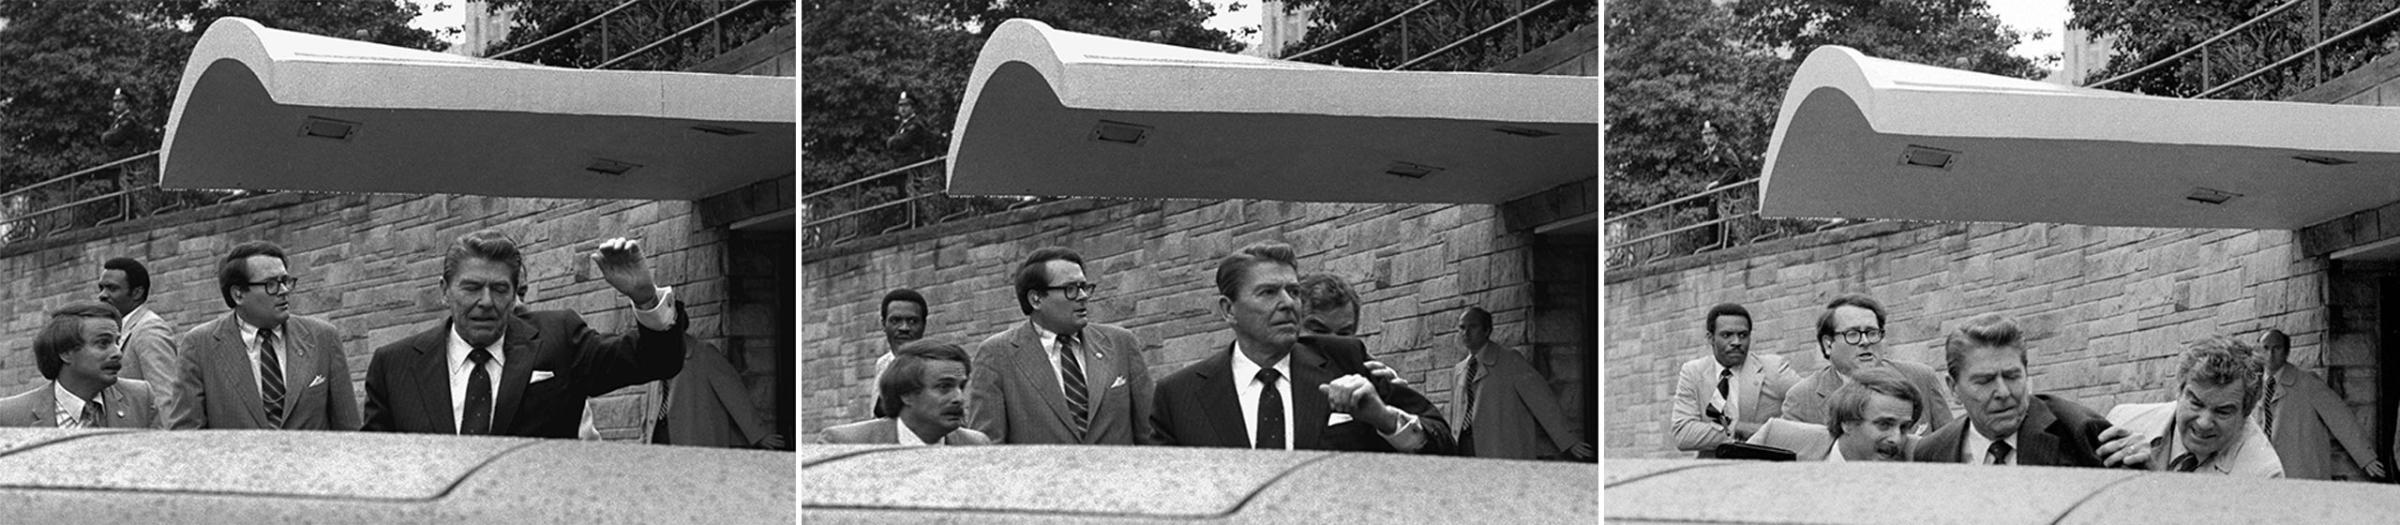 U.S. President Ronald Reagan raises his left arm as he is shot at by an assailant outside a hotel in Washington, D.C., on March 30, 1981.